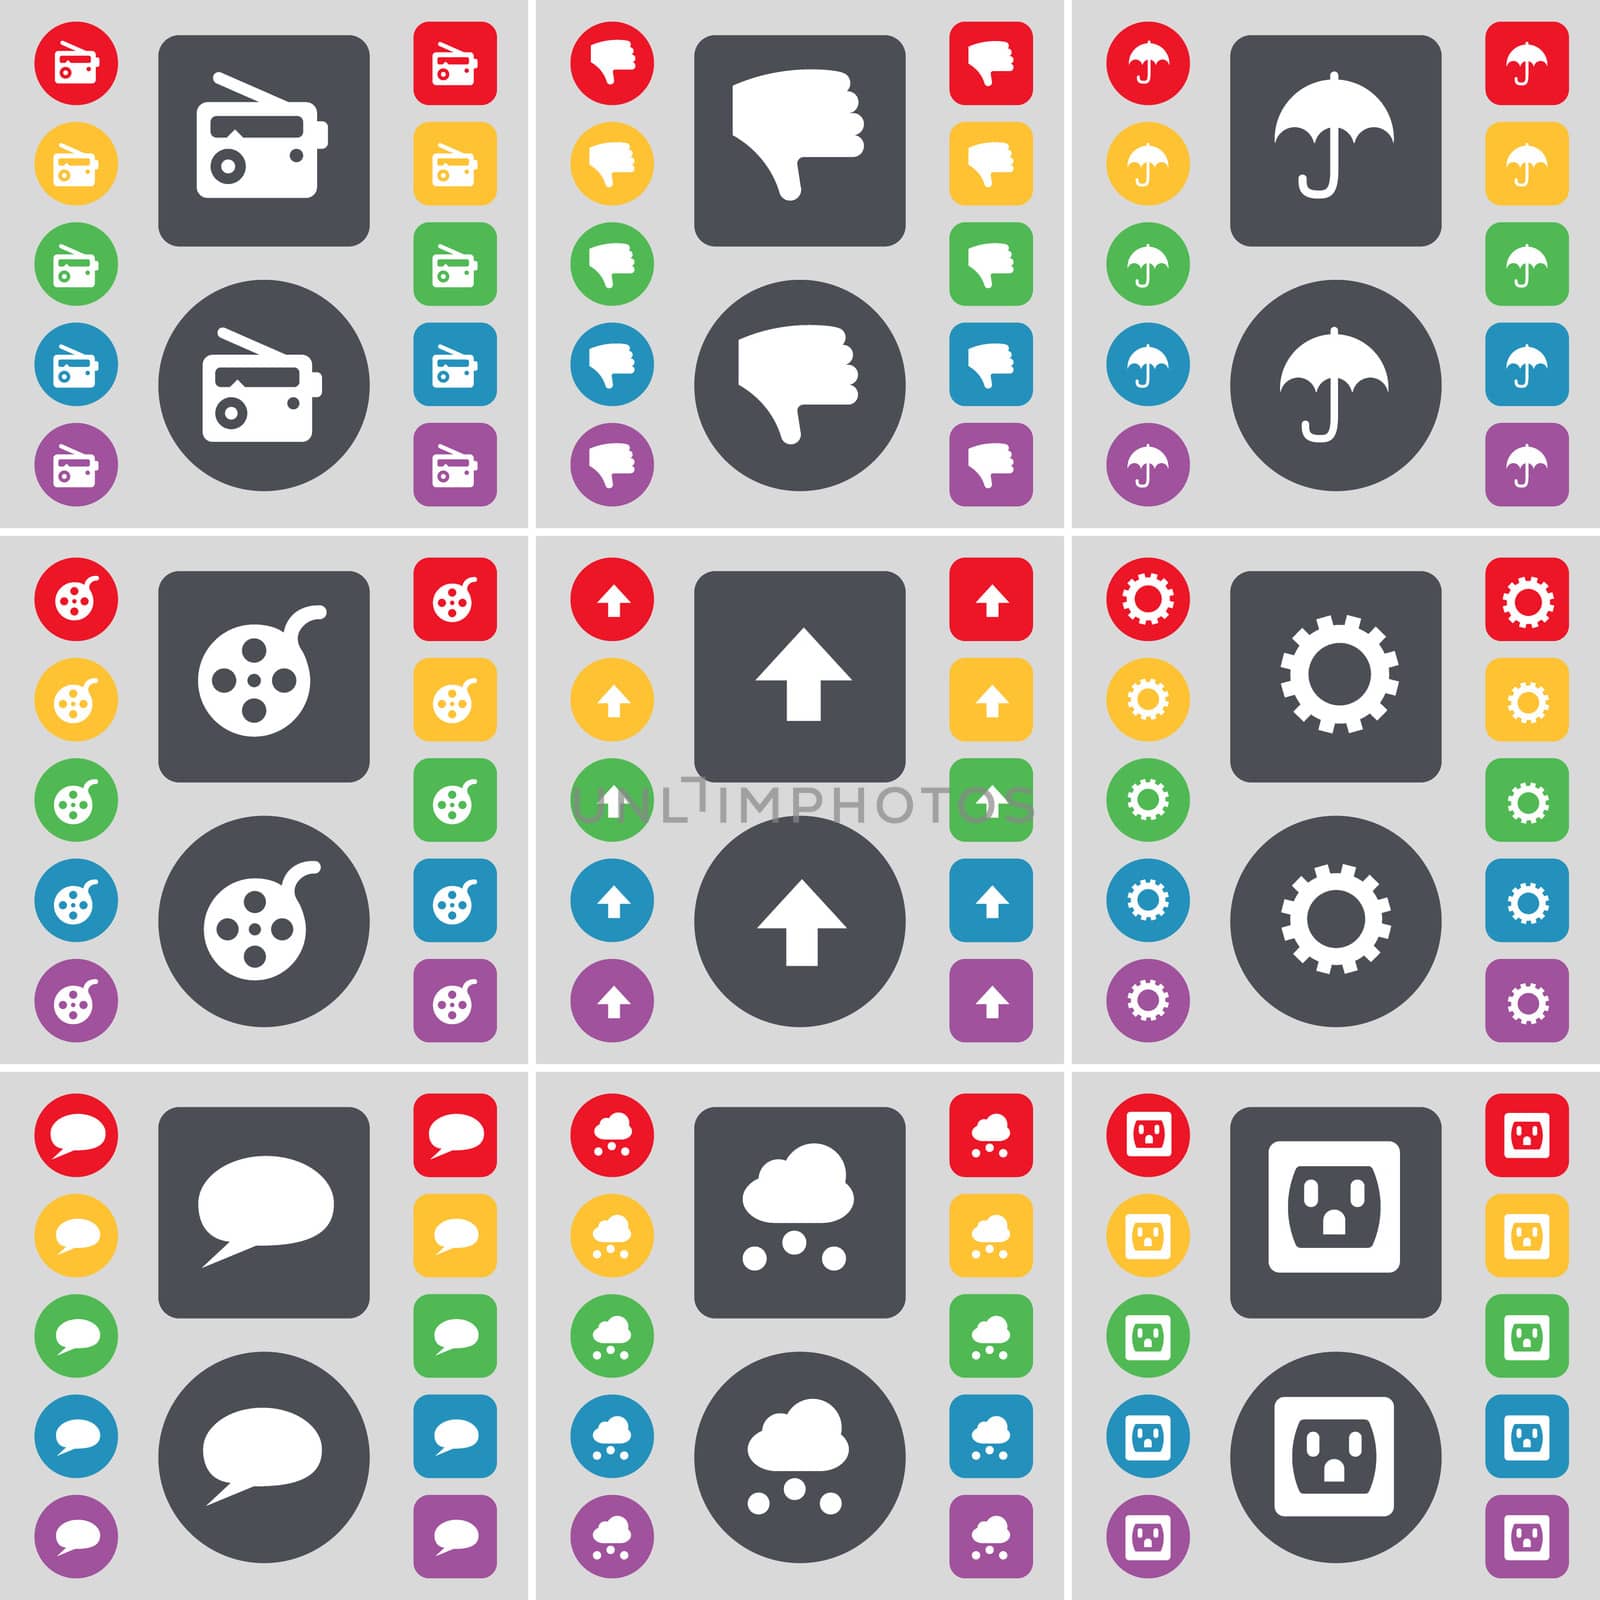 Radio, Dislike, Umbrella, Videotape, Arrow up, Gear, Chat bubble, Cloud, Socket icon symbol. A large set of flat, colored buttons for your design.  by serhii_lohvyniuk